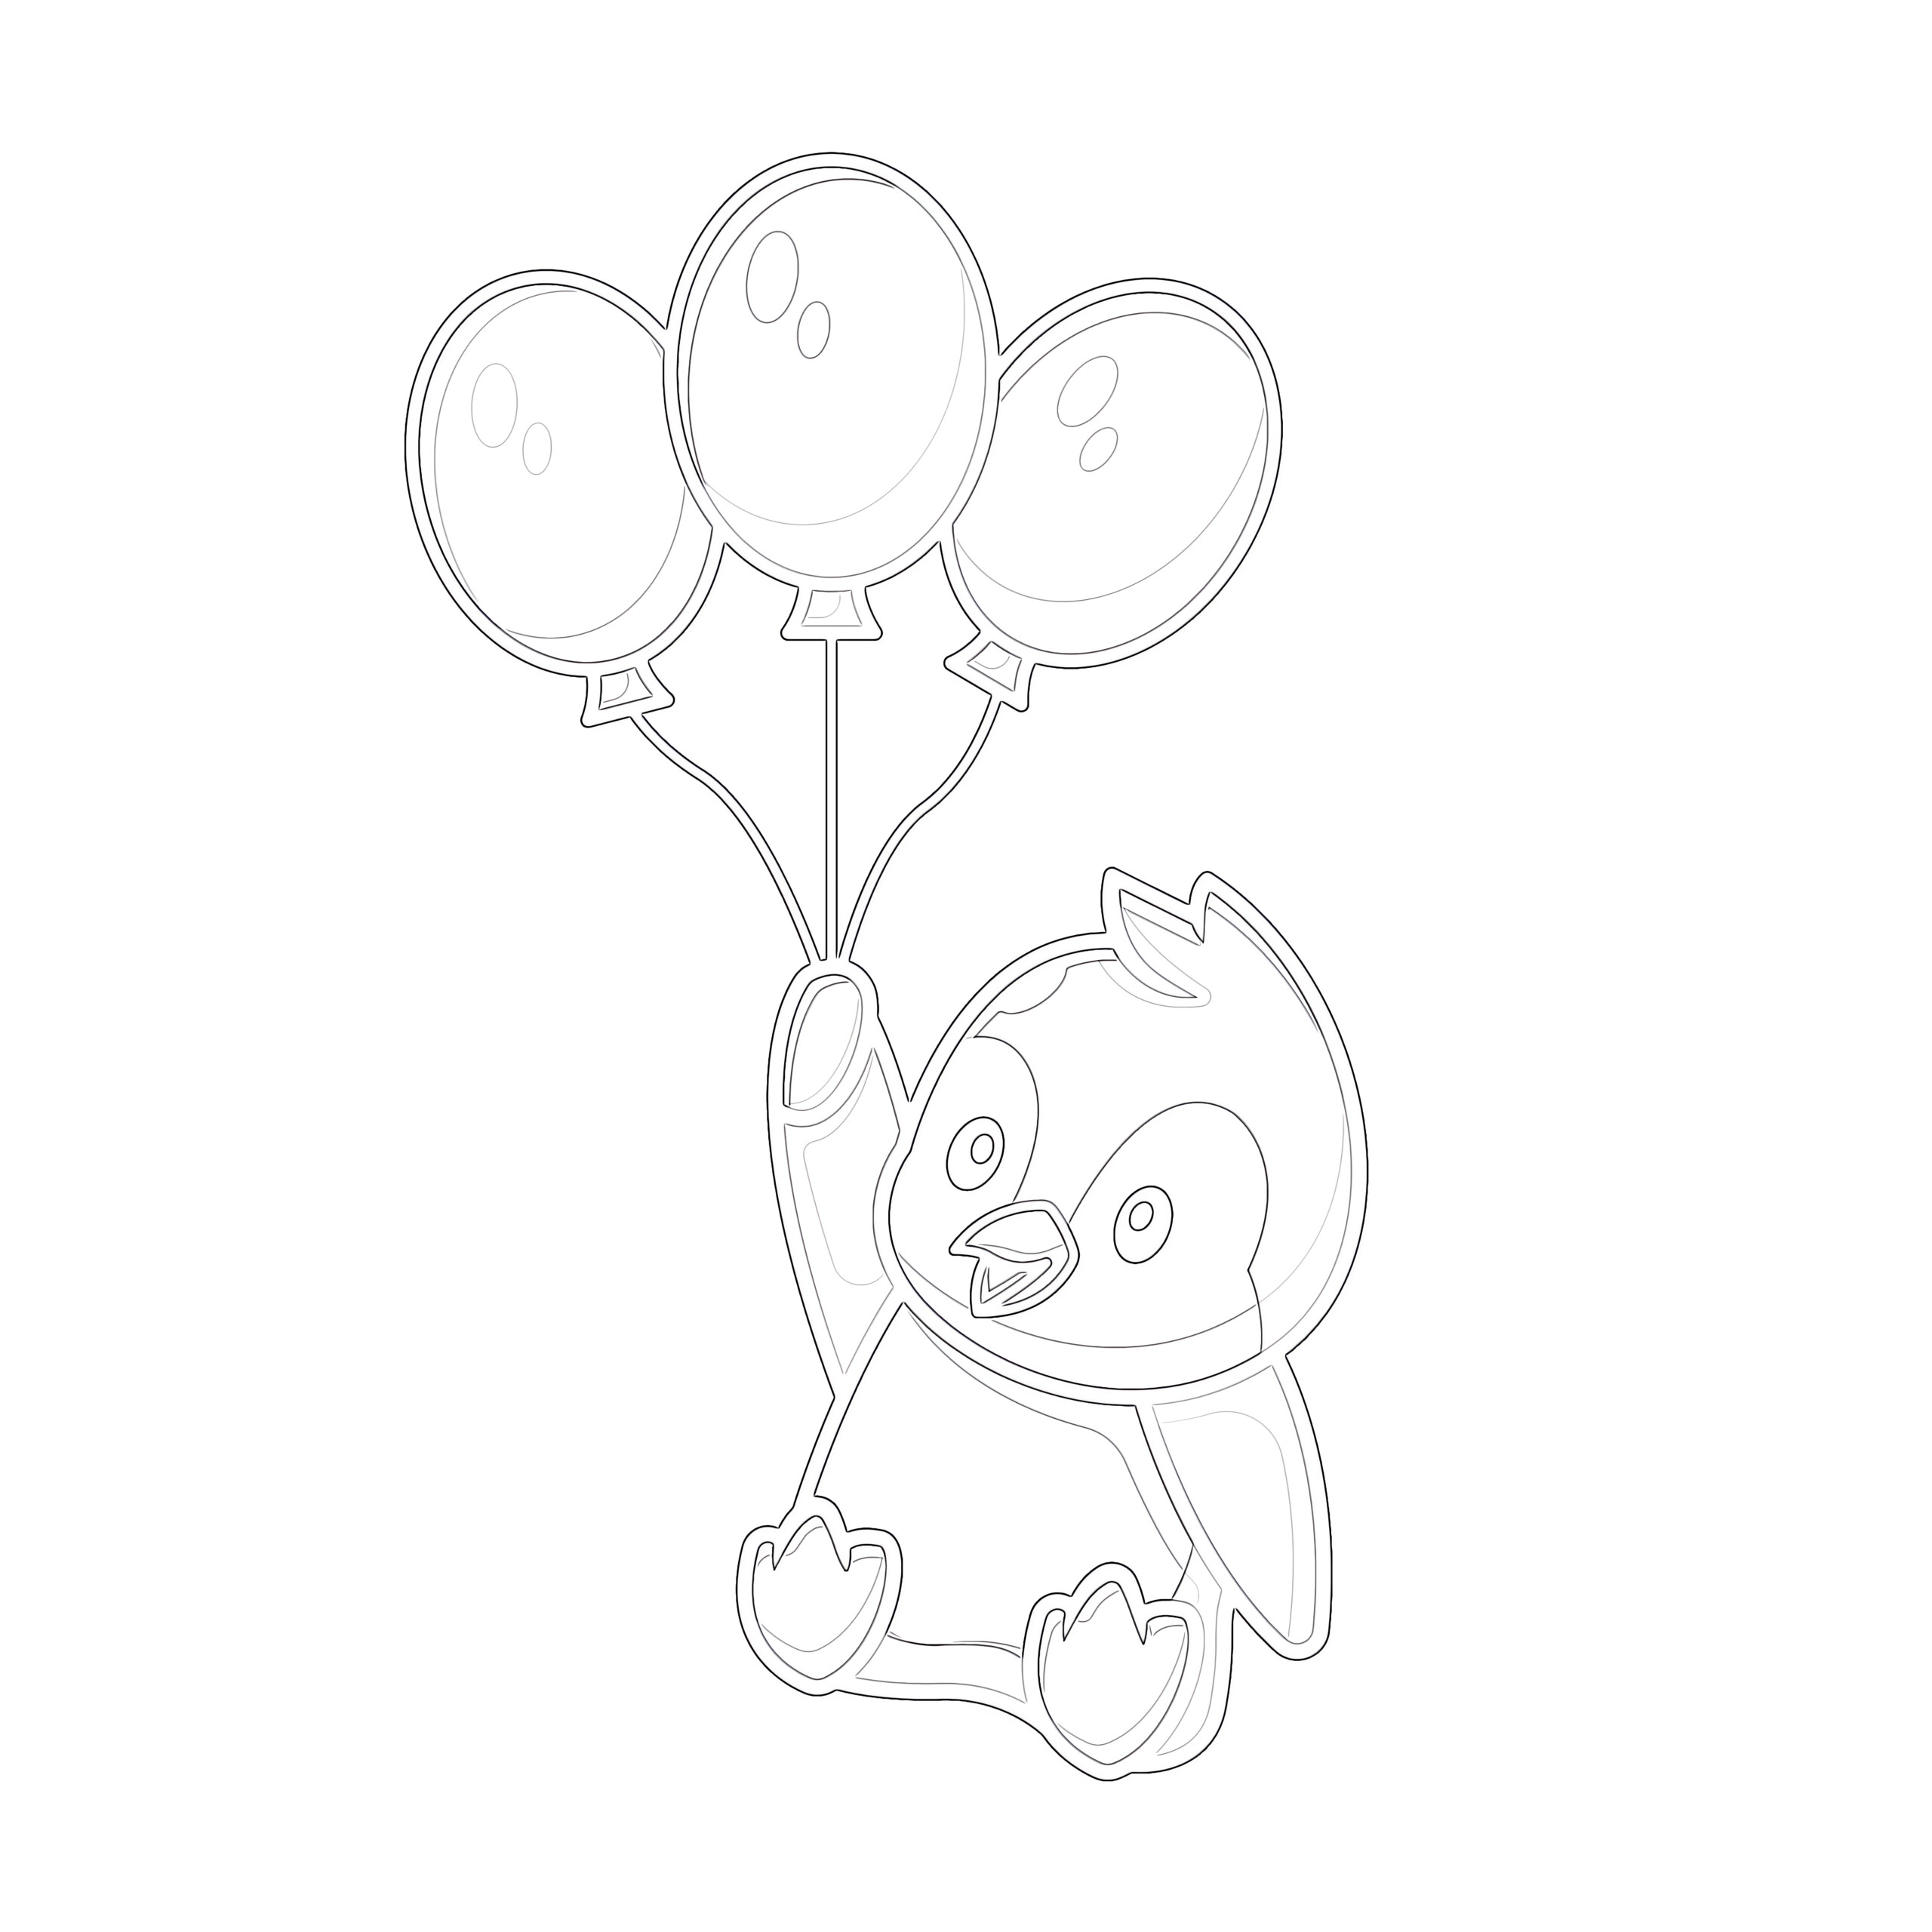 Cute penguin with balloons coloring page